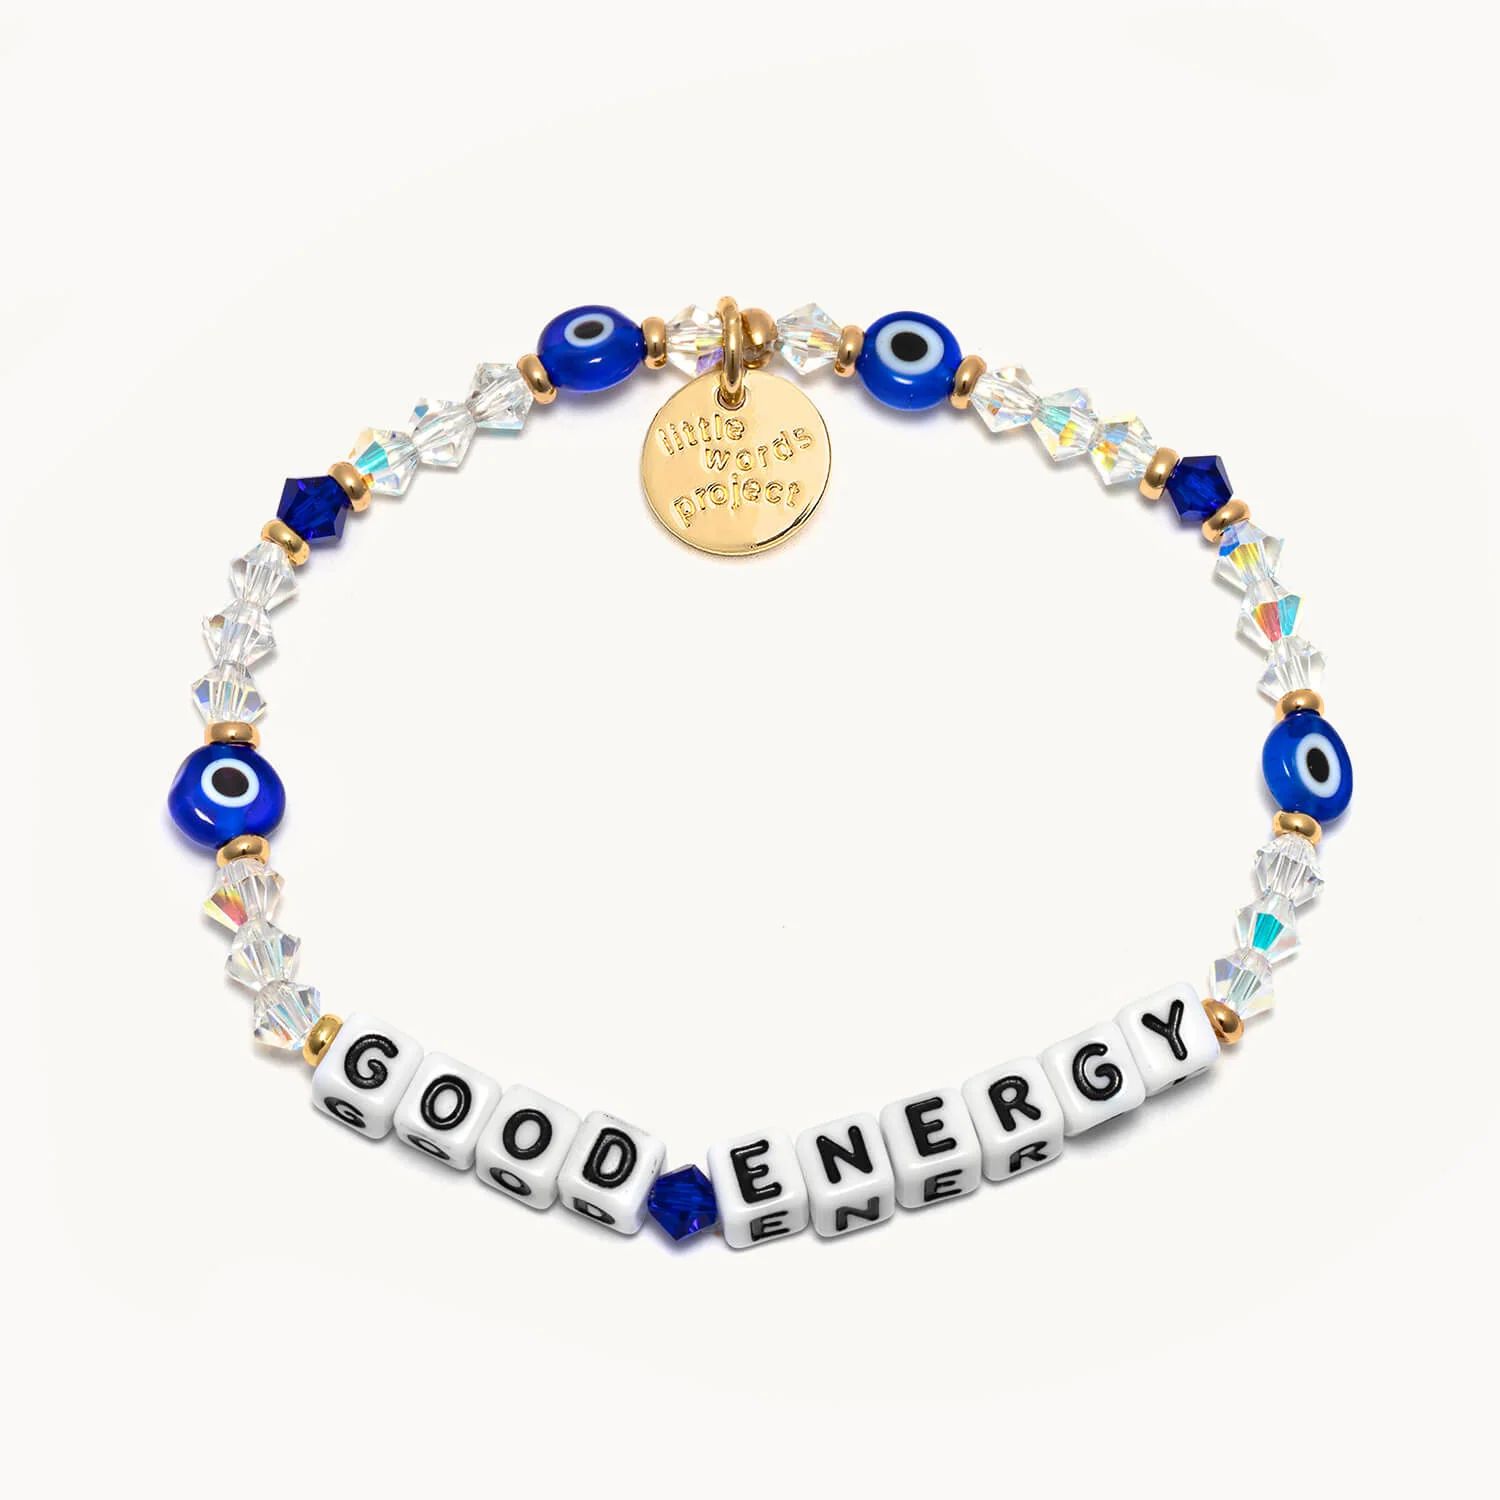 Good Energy- Lucky Symbols | Little Words Project